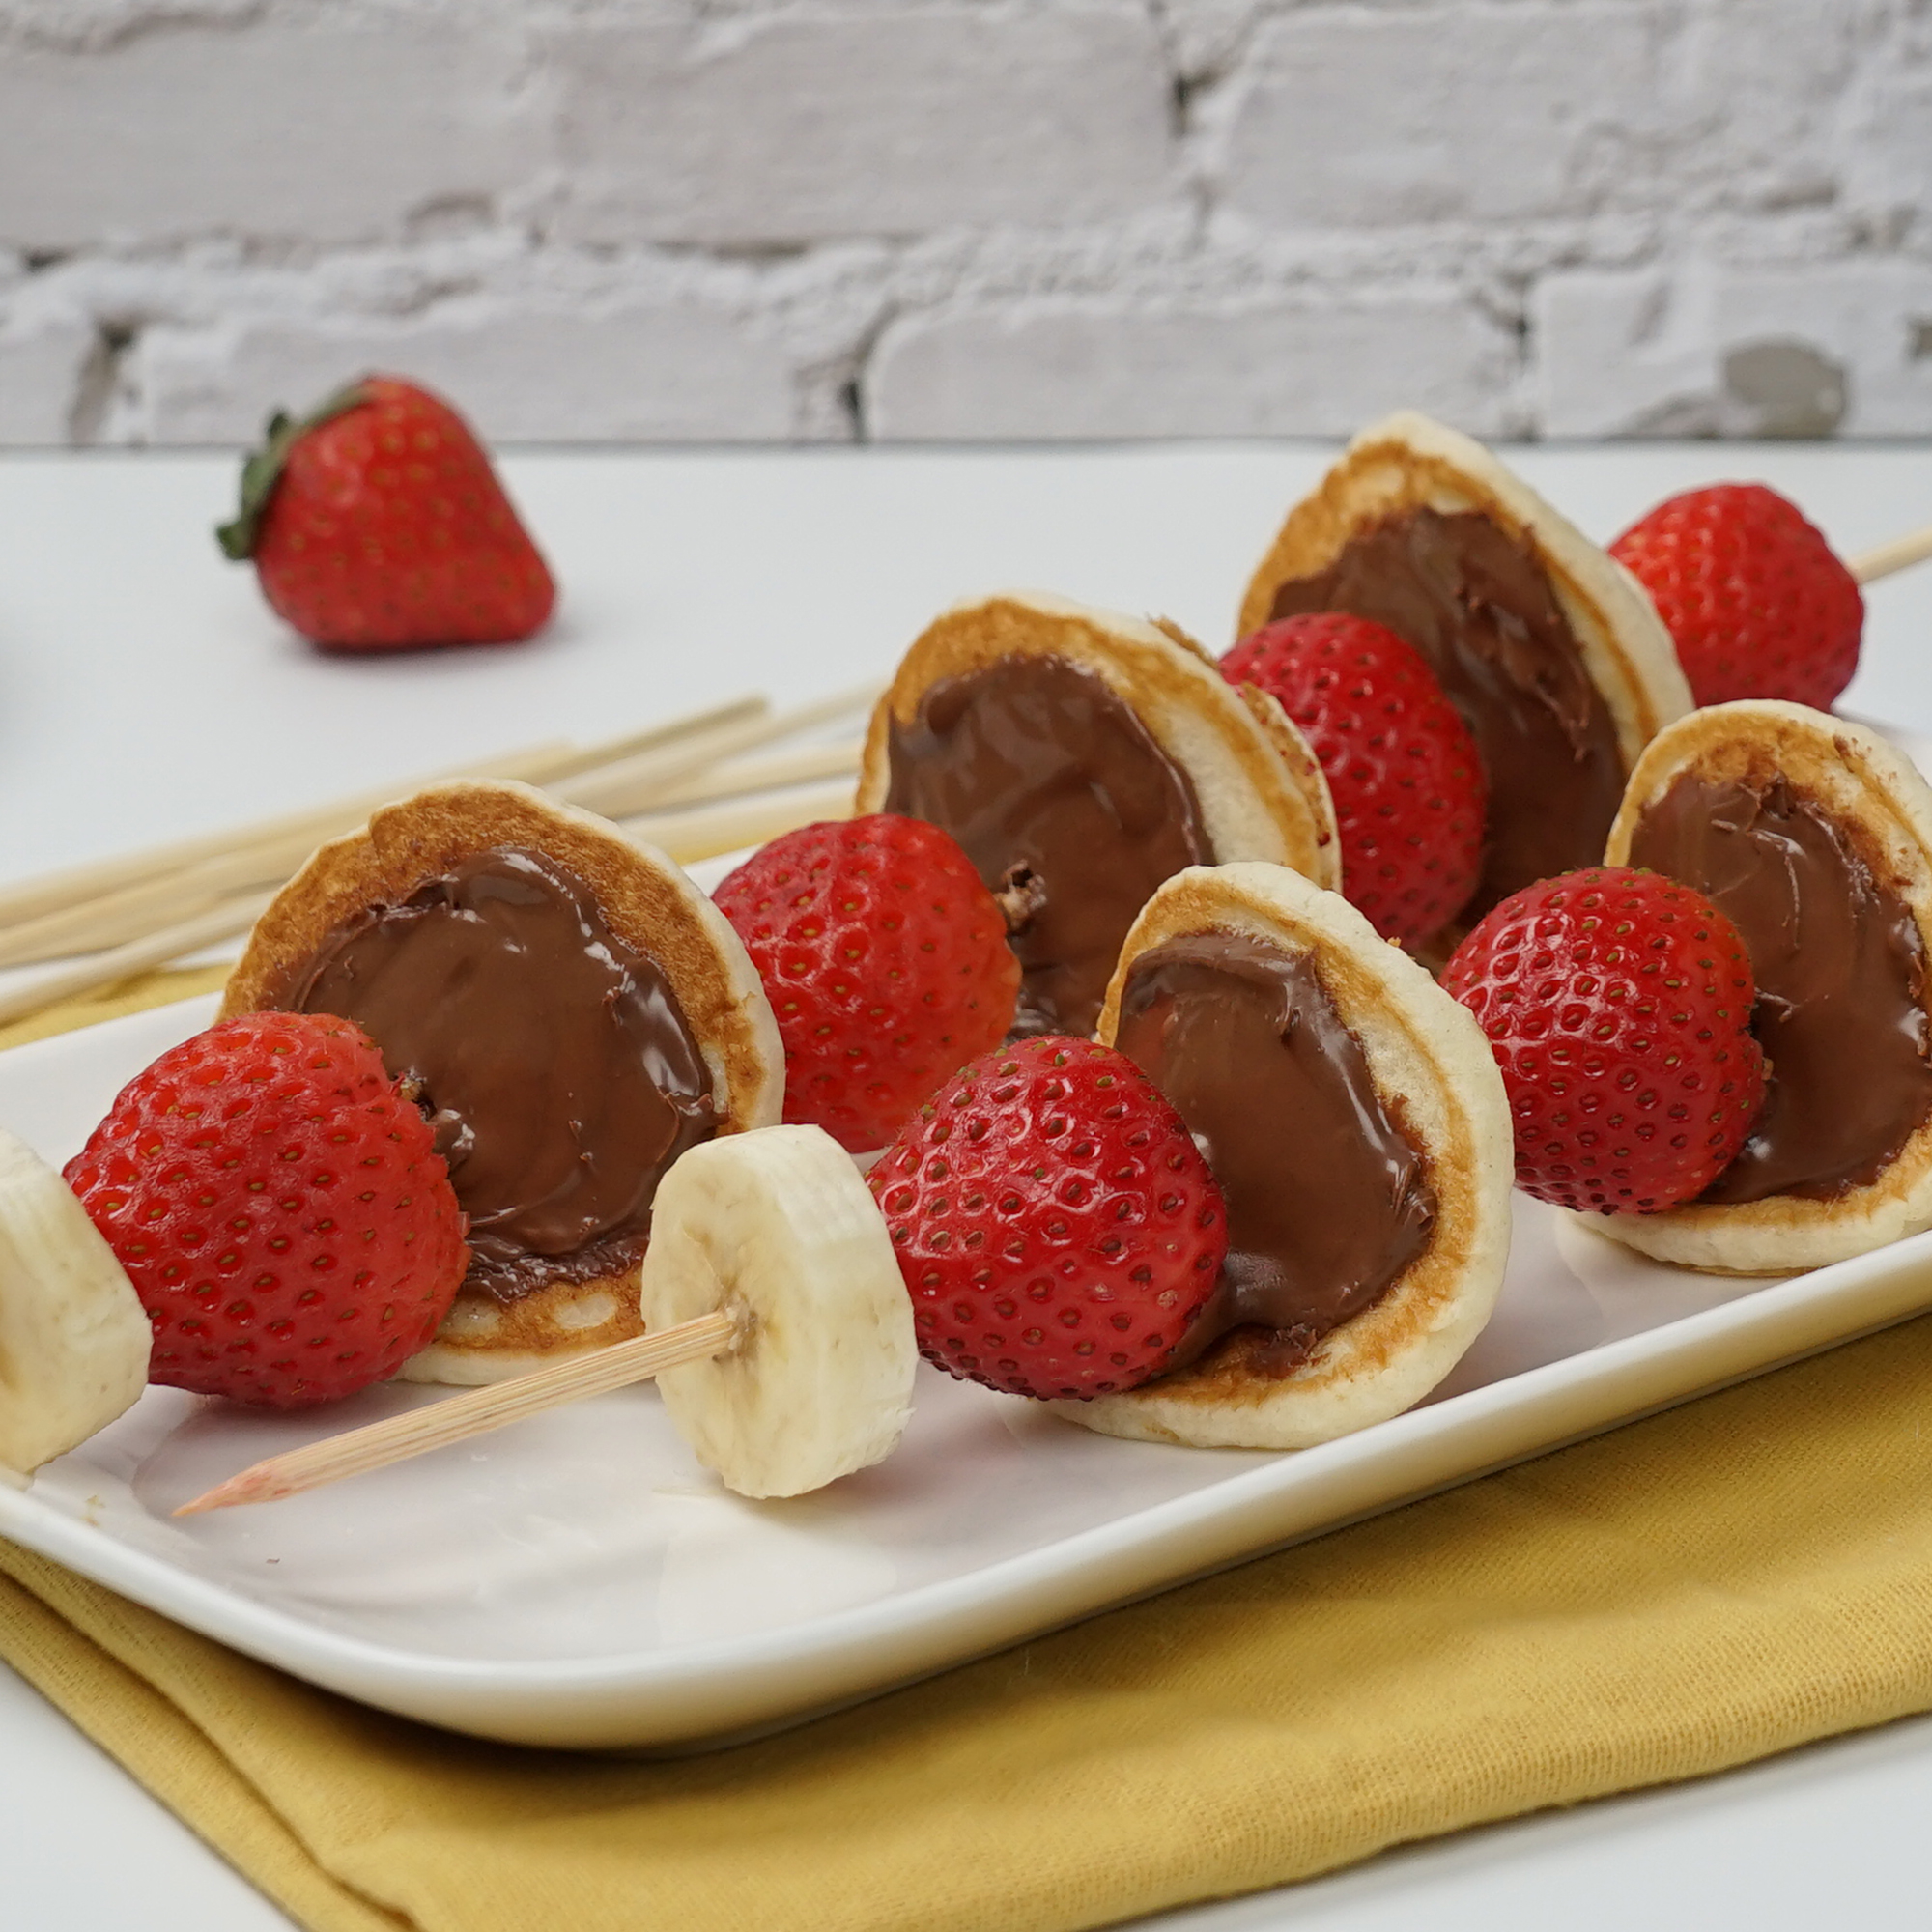 A plate of Pancake Skewers with Nutella® Hazelnut Spread, bananas and strawberries.